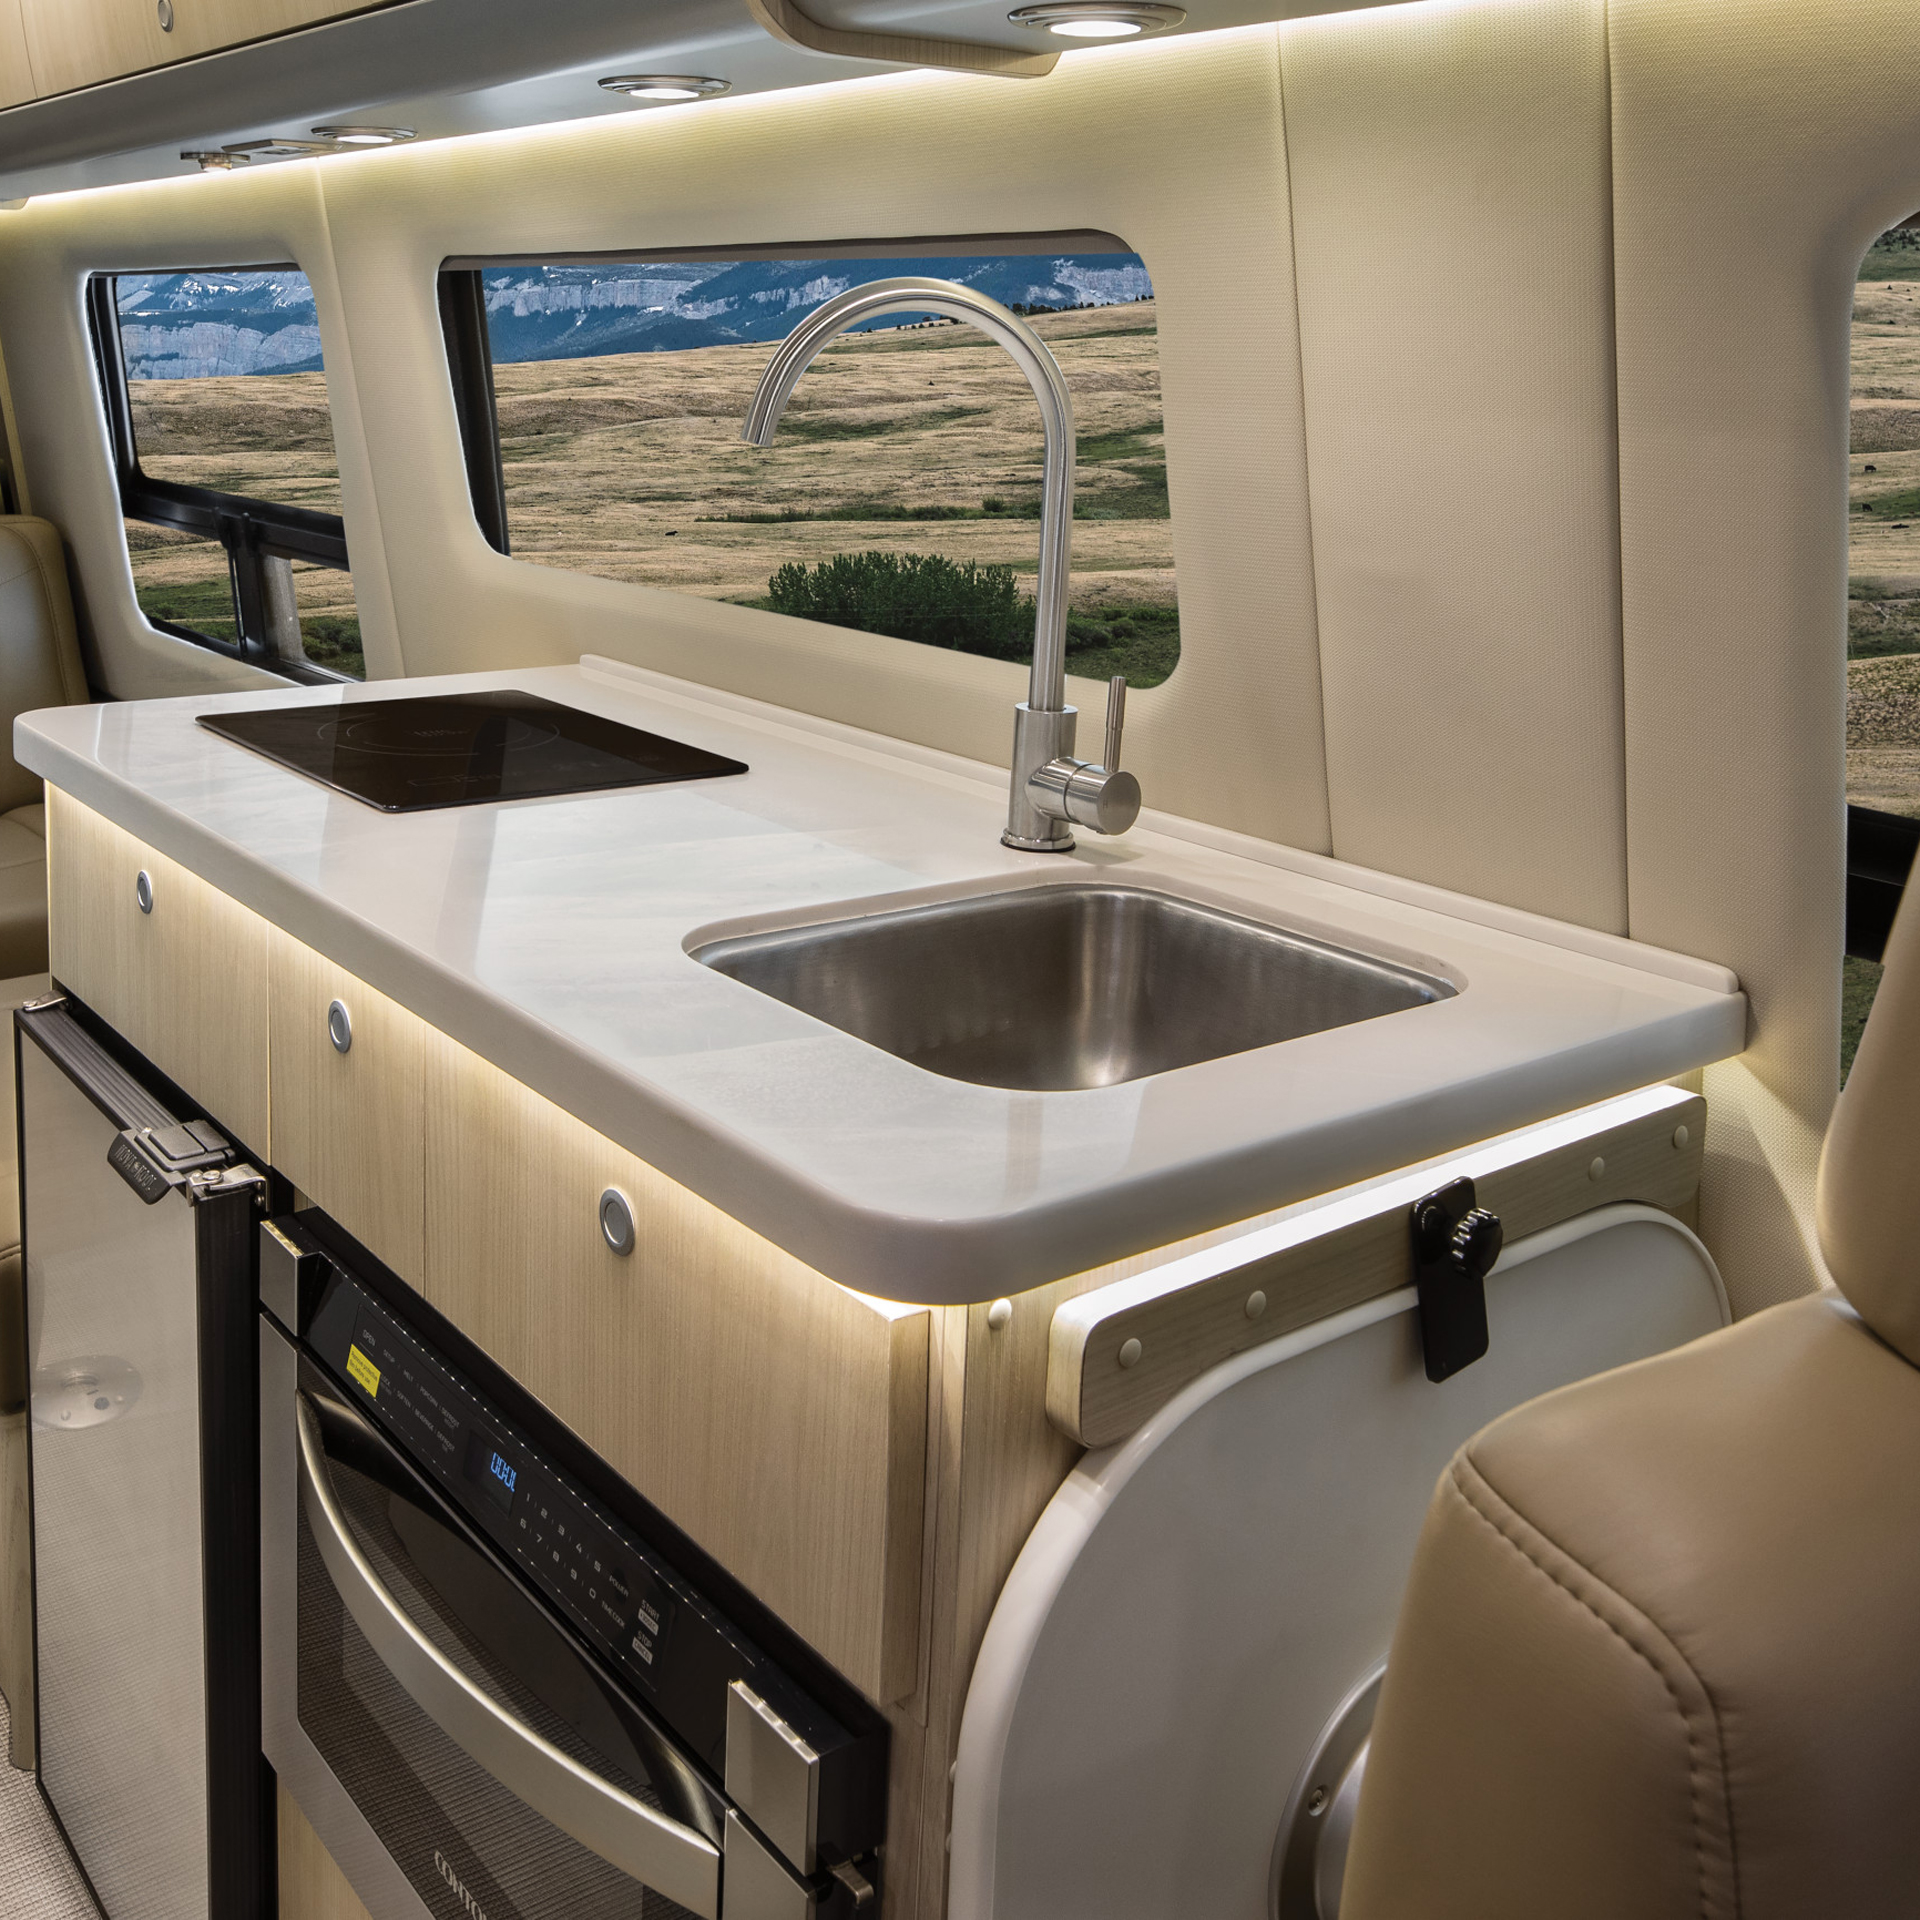 Airstream Interstate 24 Class B's galley with the new classic canyon decor.